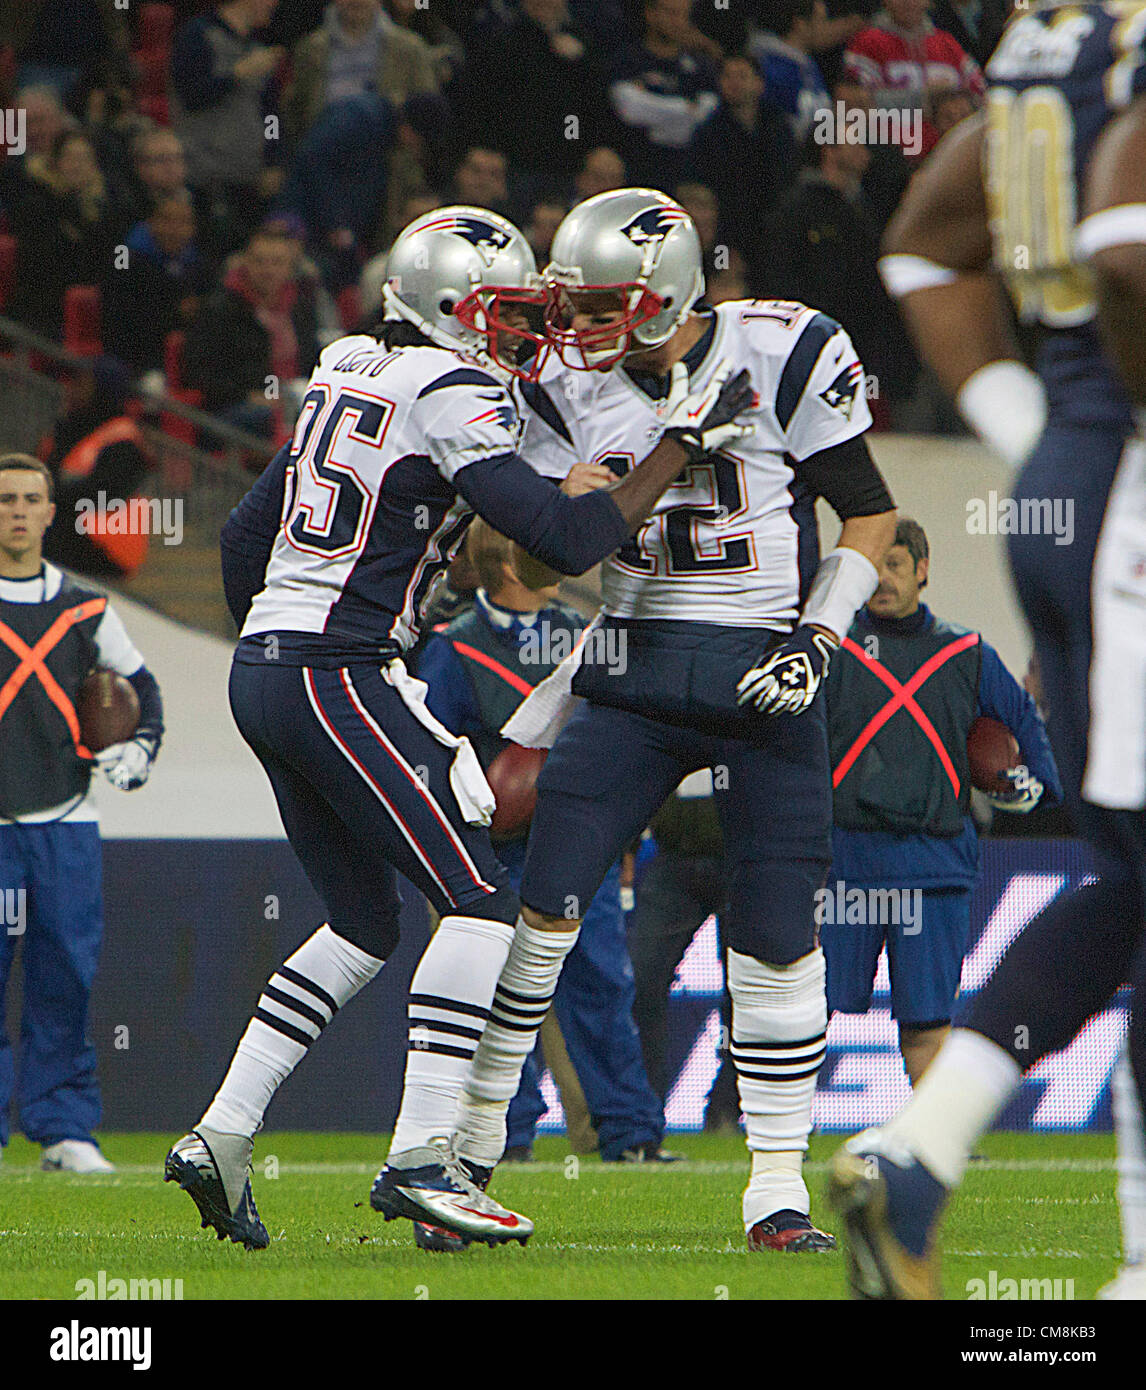 28.10.2012 London, England. NE Patriots QB Tom Brady celebrates after he  throws a TD pass with TD scorer WR Brandon Lloyd during the NFL  International Series 2012 game between The Bill Belichick